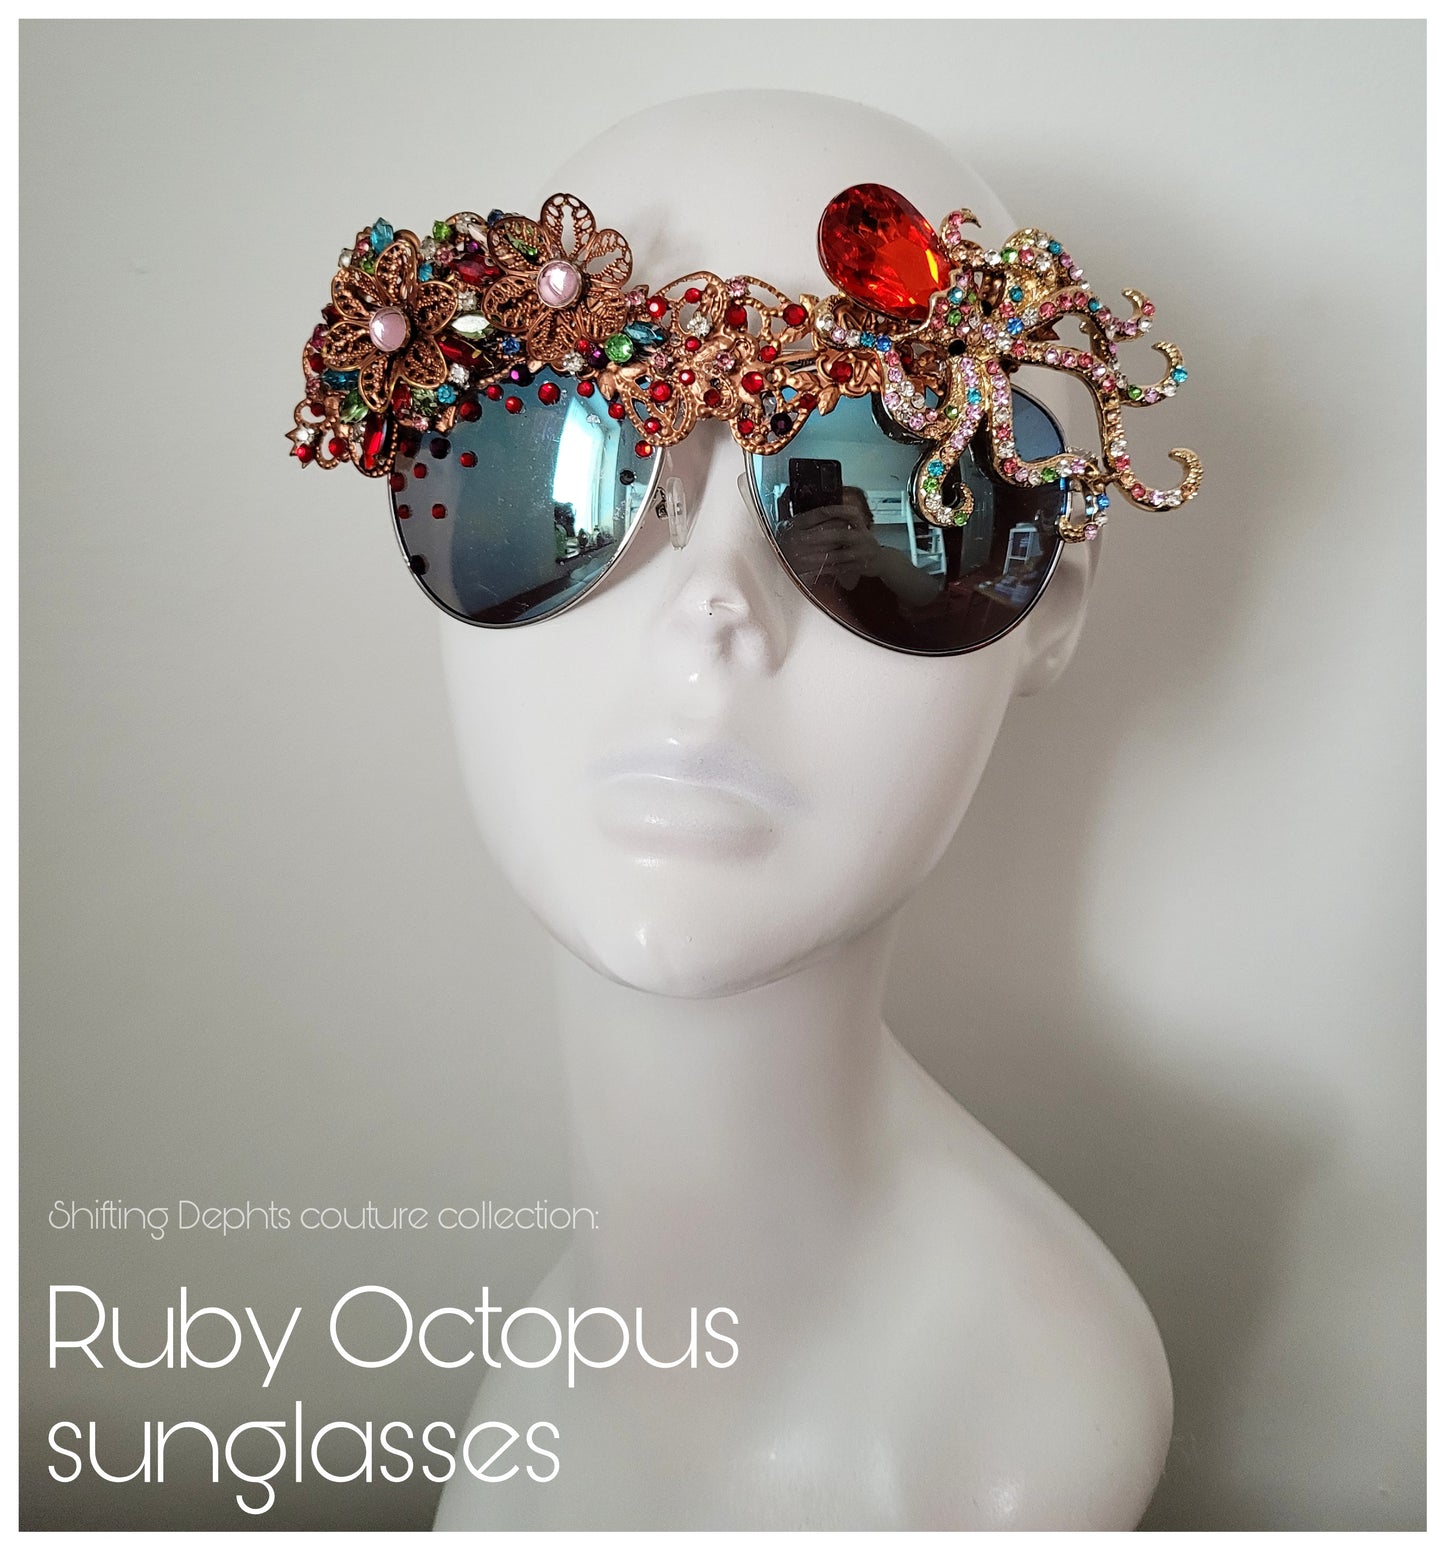 Shifting Depths collection: the Ruby Octopus showpiece sunglasses